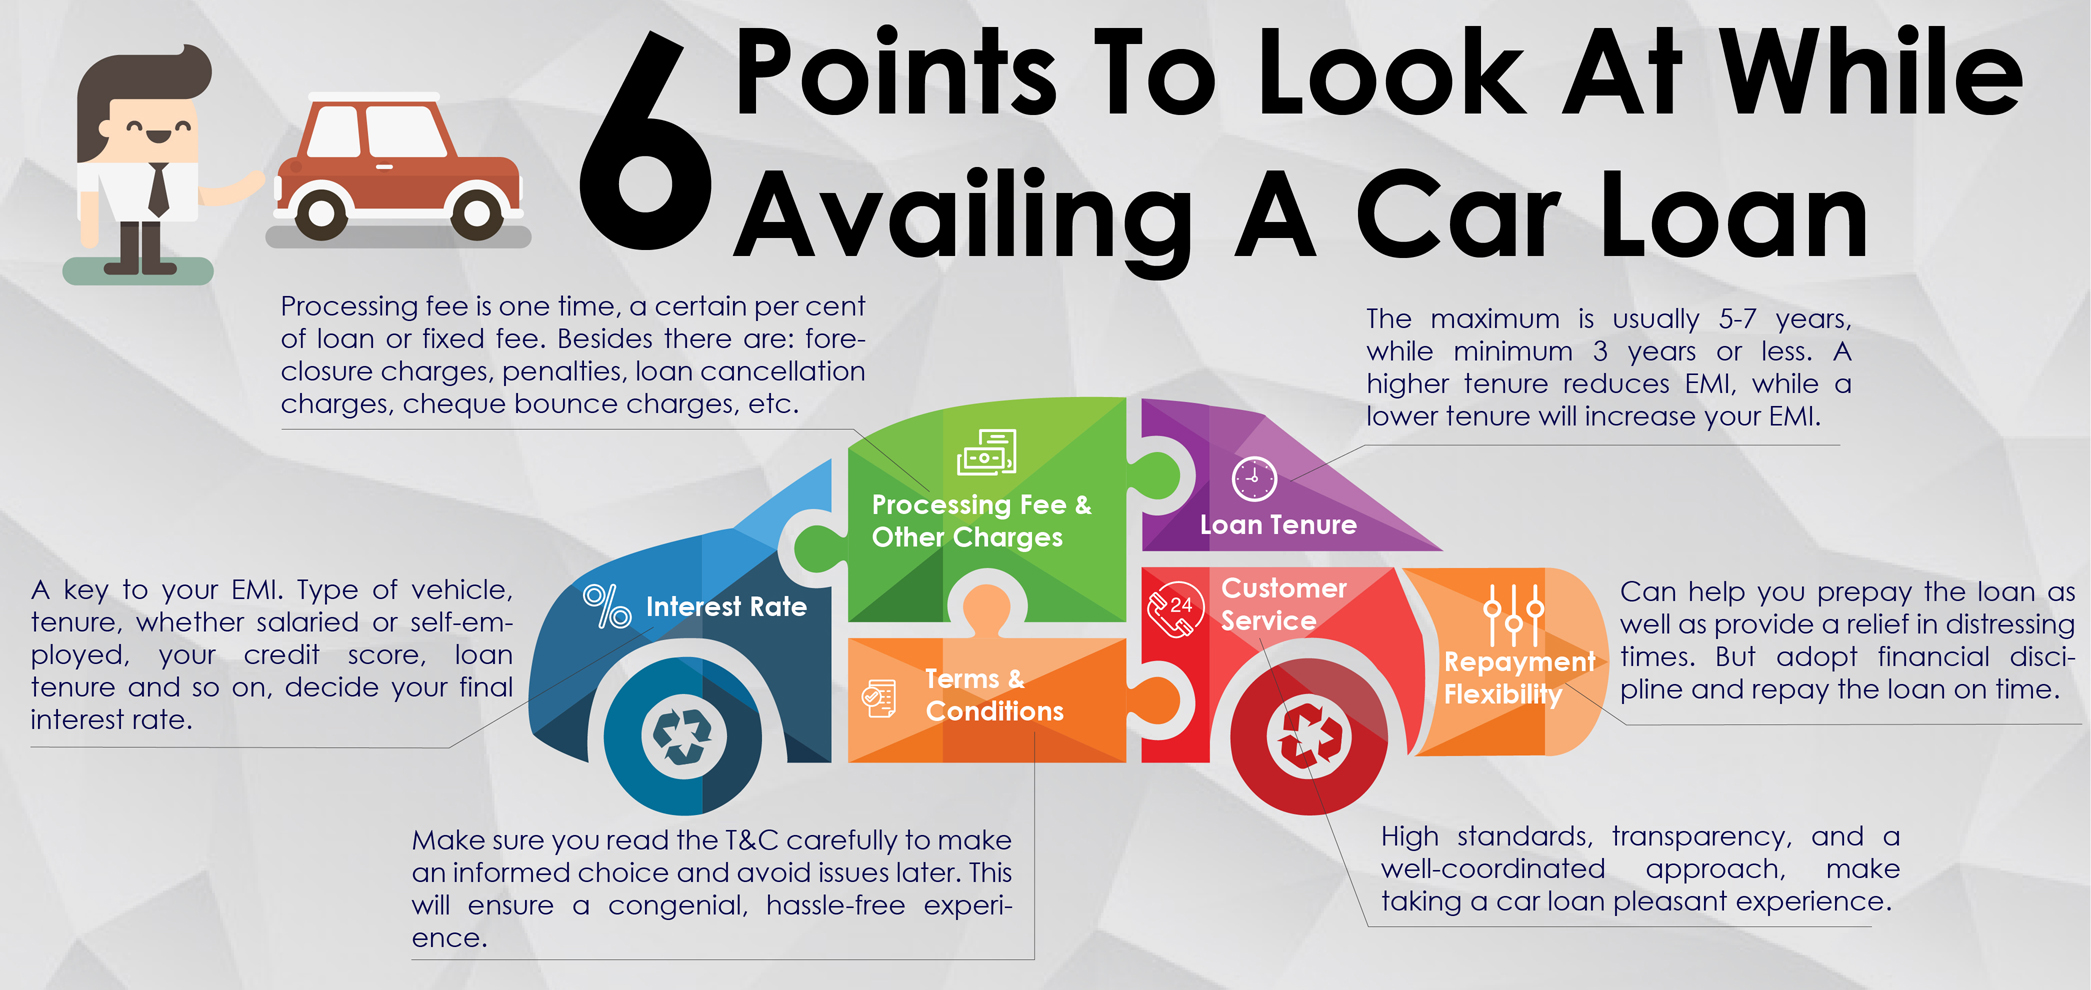 Axis Bank - 6 Points To Look At While Availing A Car Loan